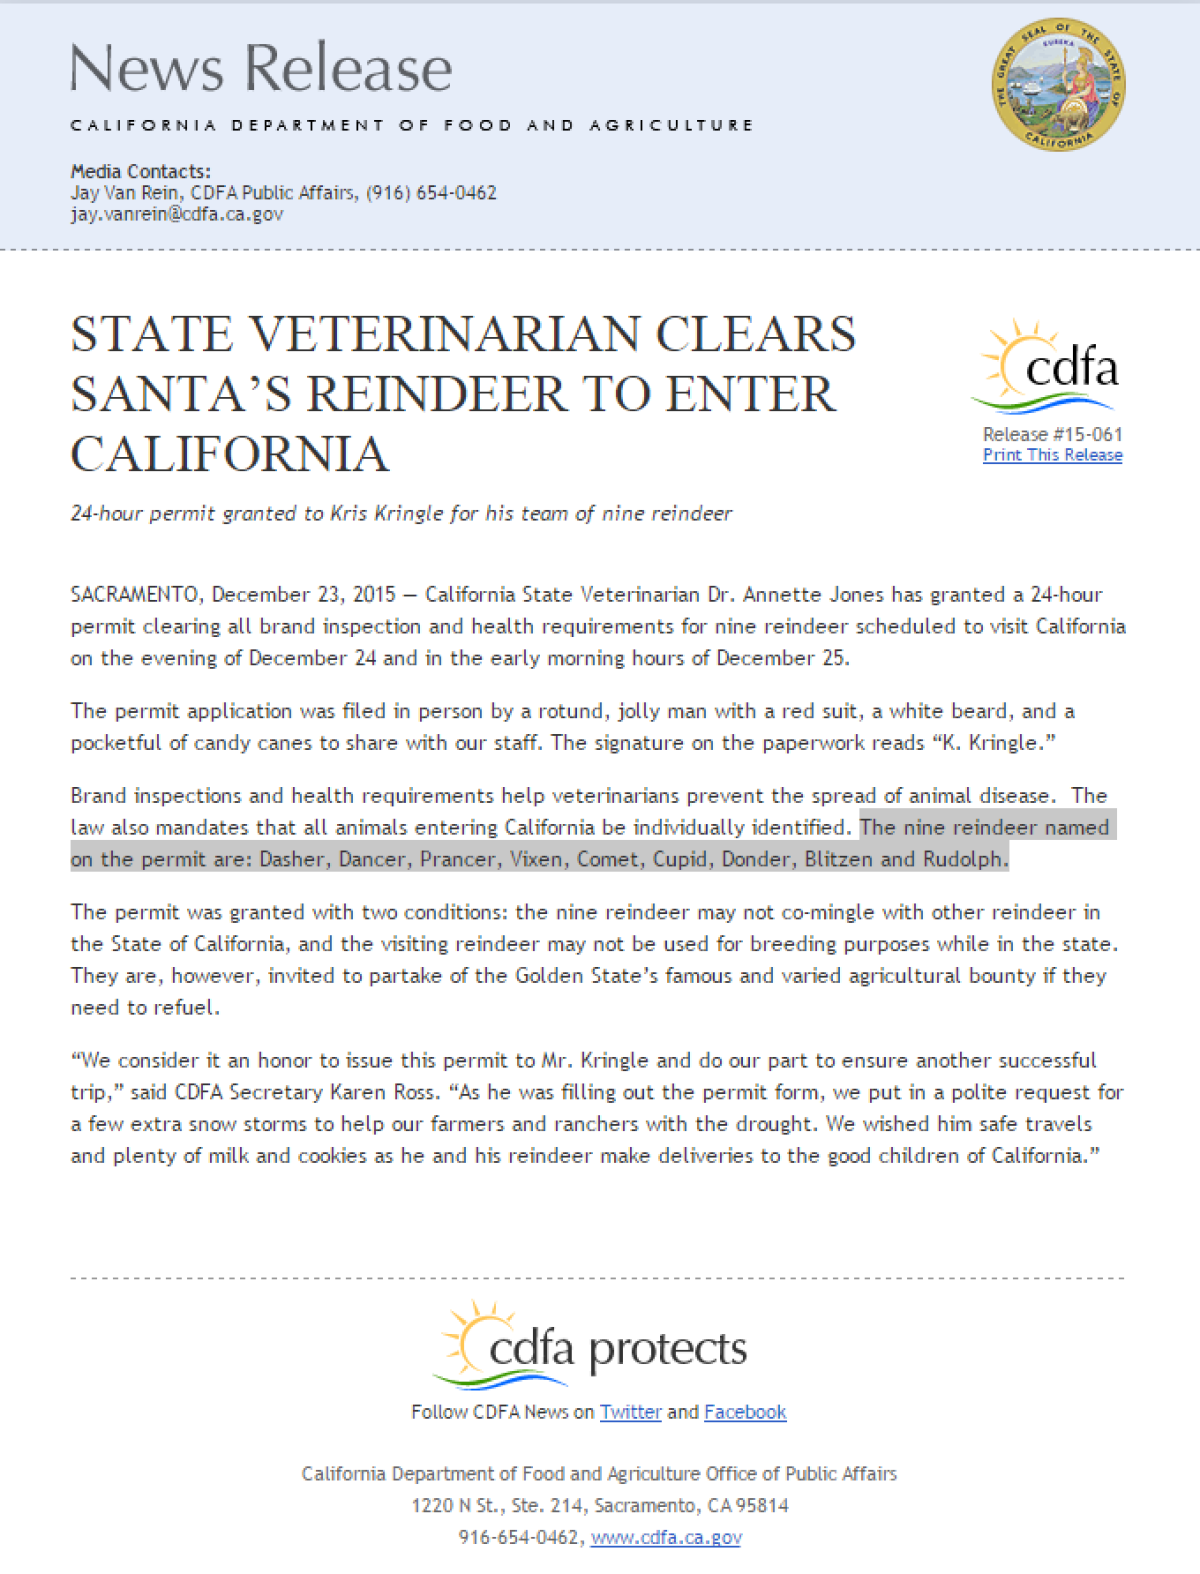 California sticks closer to the original Dutch, calling one of Santa's imported ruminants Donder, not Donner. USDA disagrees.